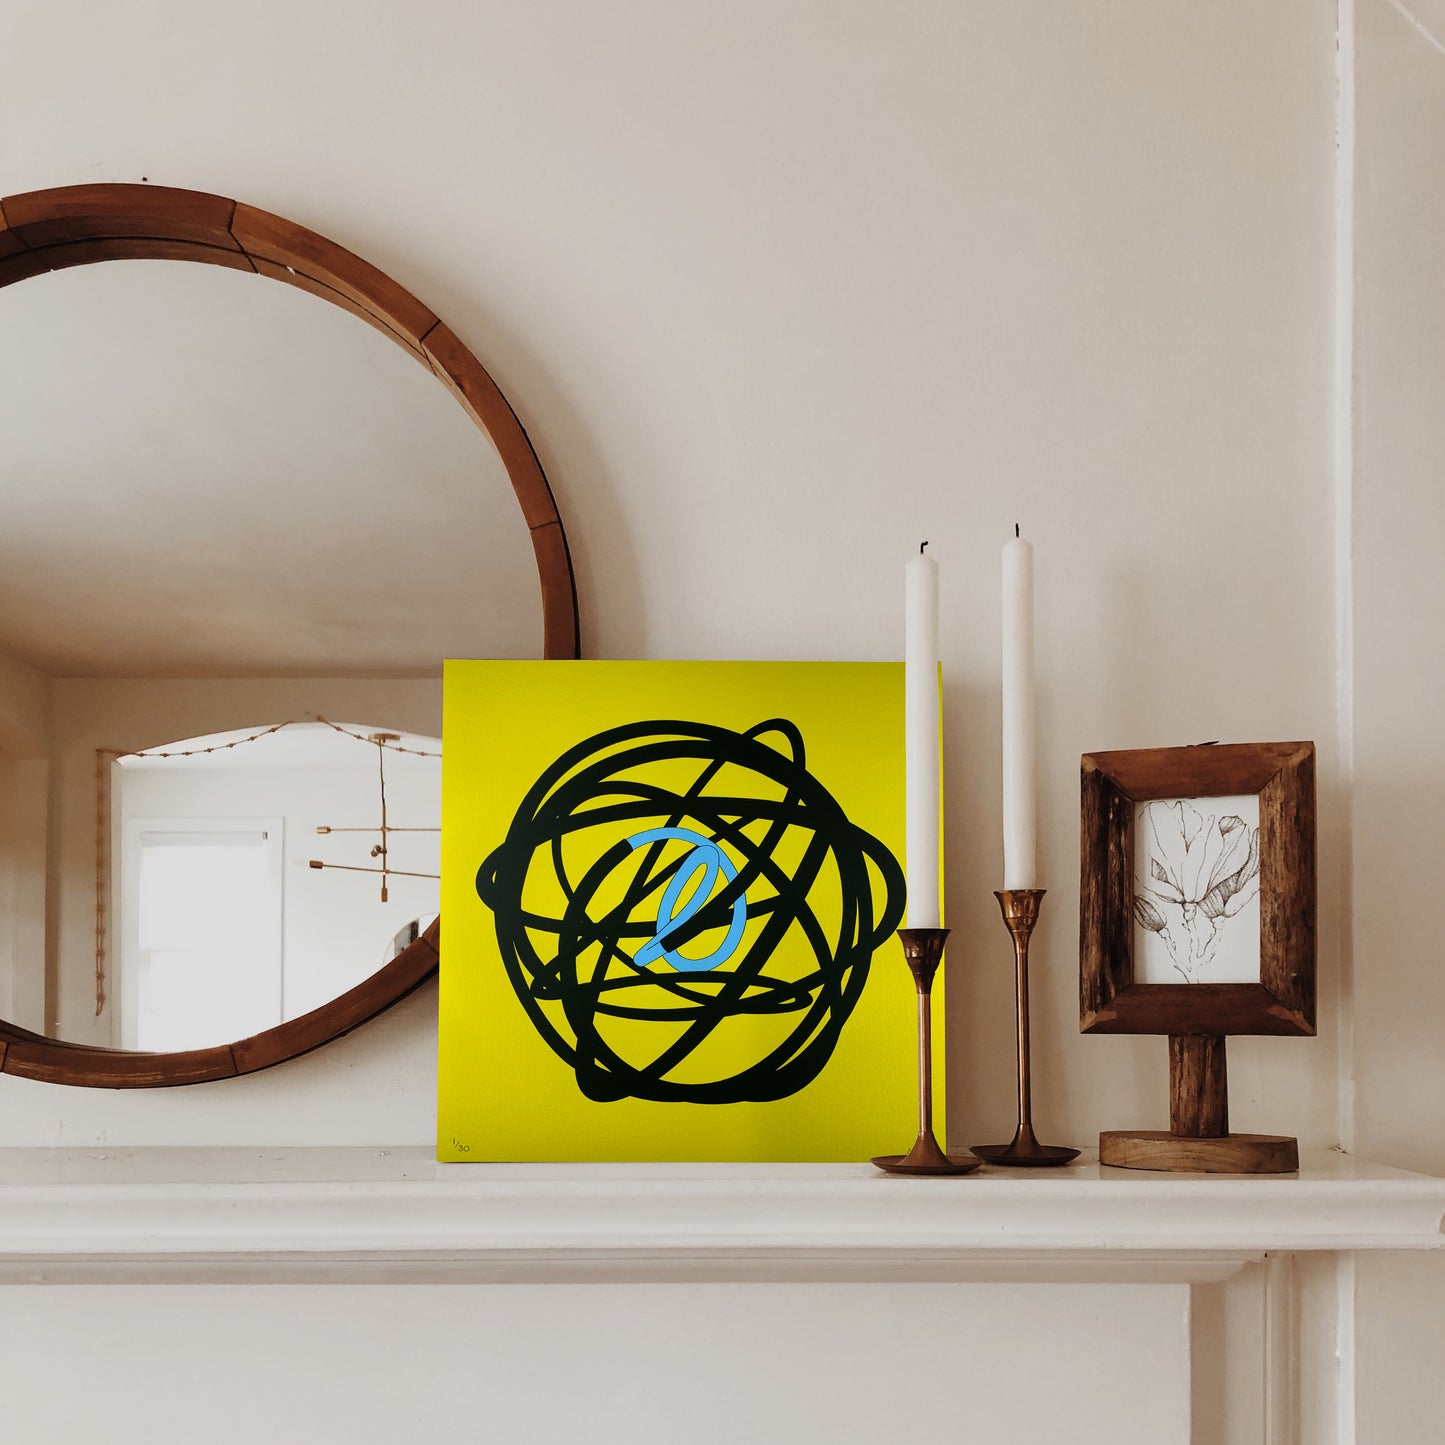 Elevate your art collection with Mark Beattie's Neon Globe (Blue and Yellow). This limited edition Giclée print on 310gsm Hahnemühle German Etching paper, measuring 30 x 30 cm, is part of an exclusive edition of 30. Immerse your space in the captivating interplay of colors and forms, where artistic precision meets limited edition exclusivity.